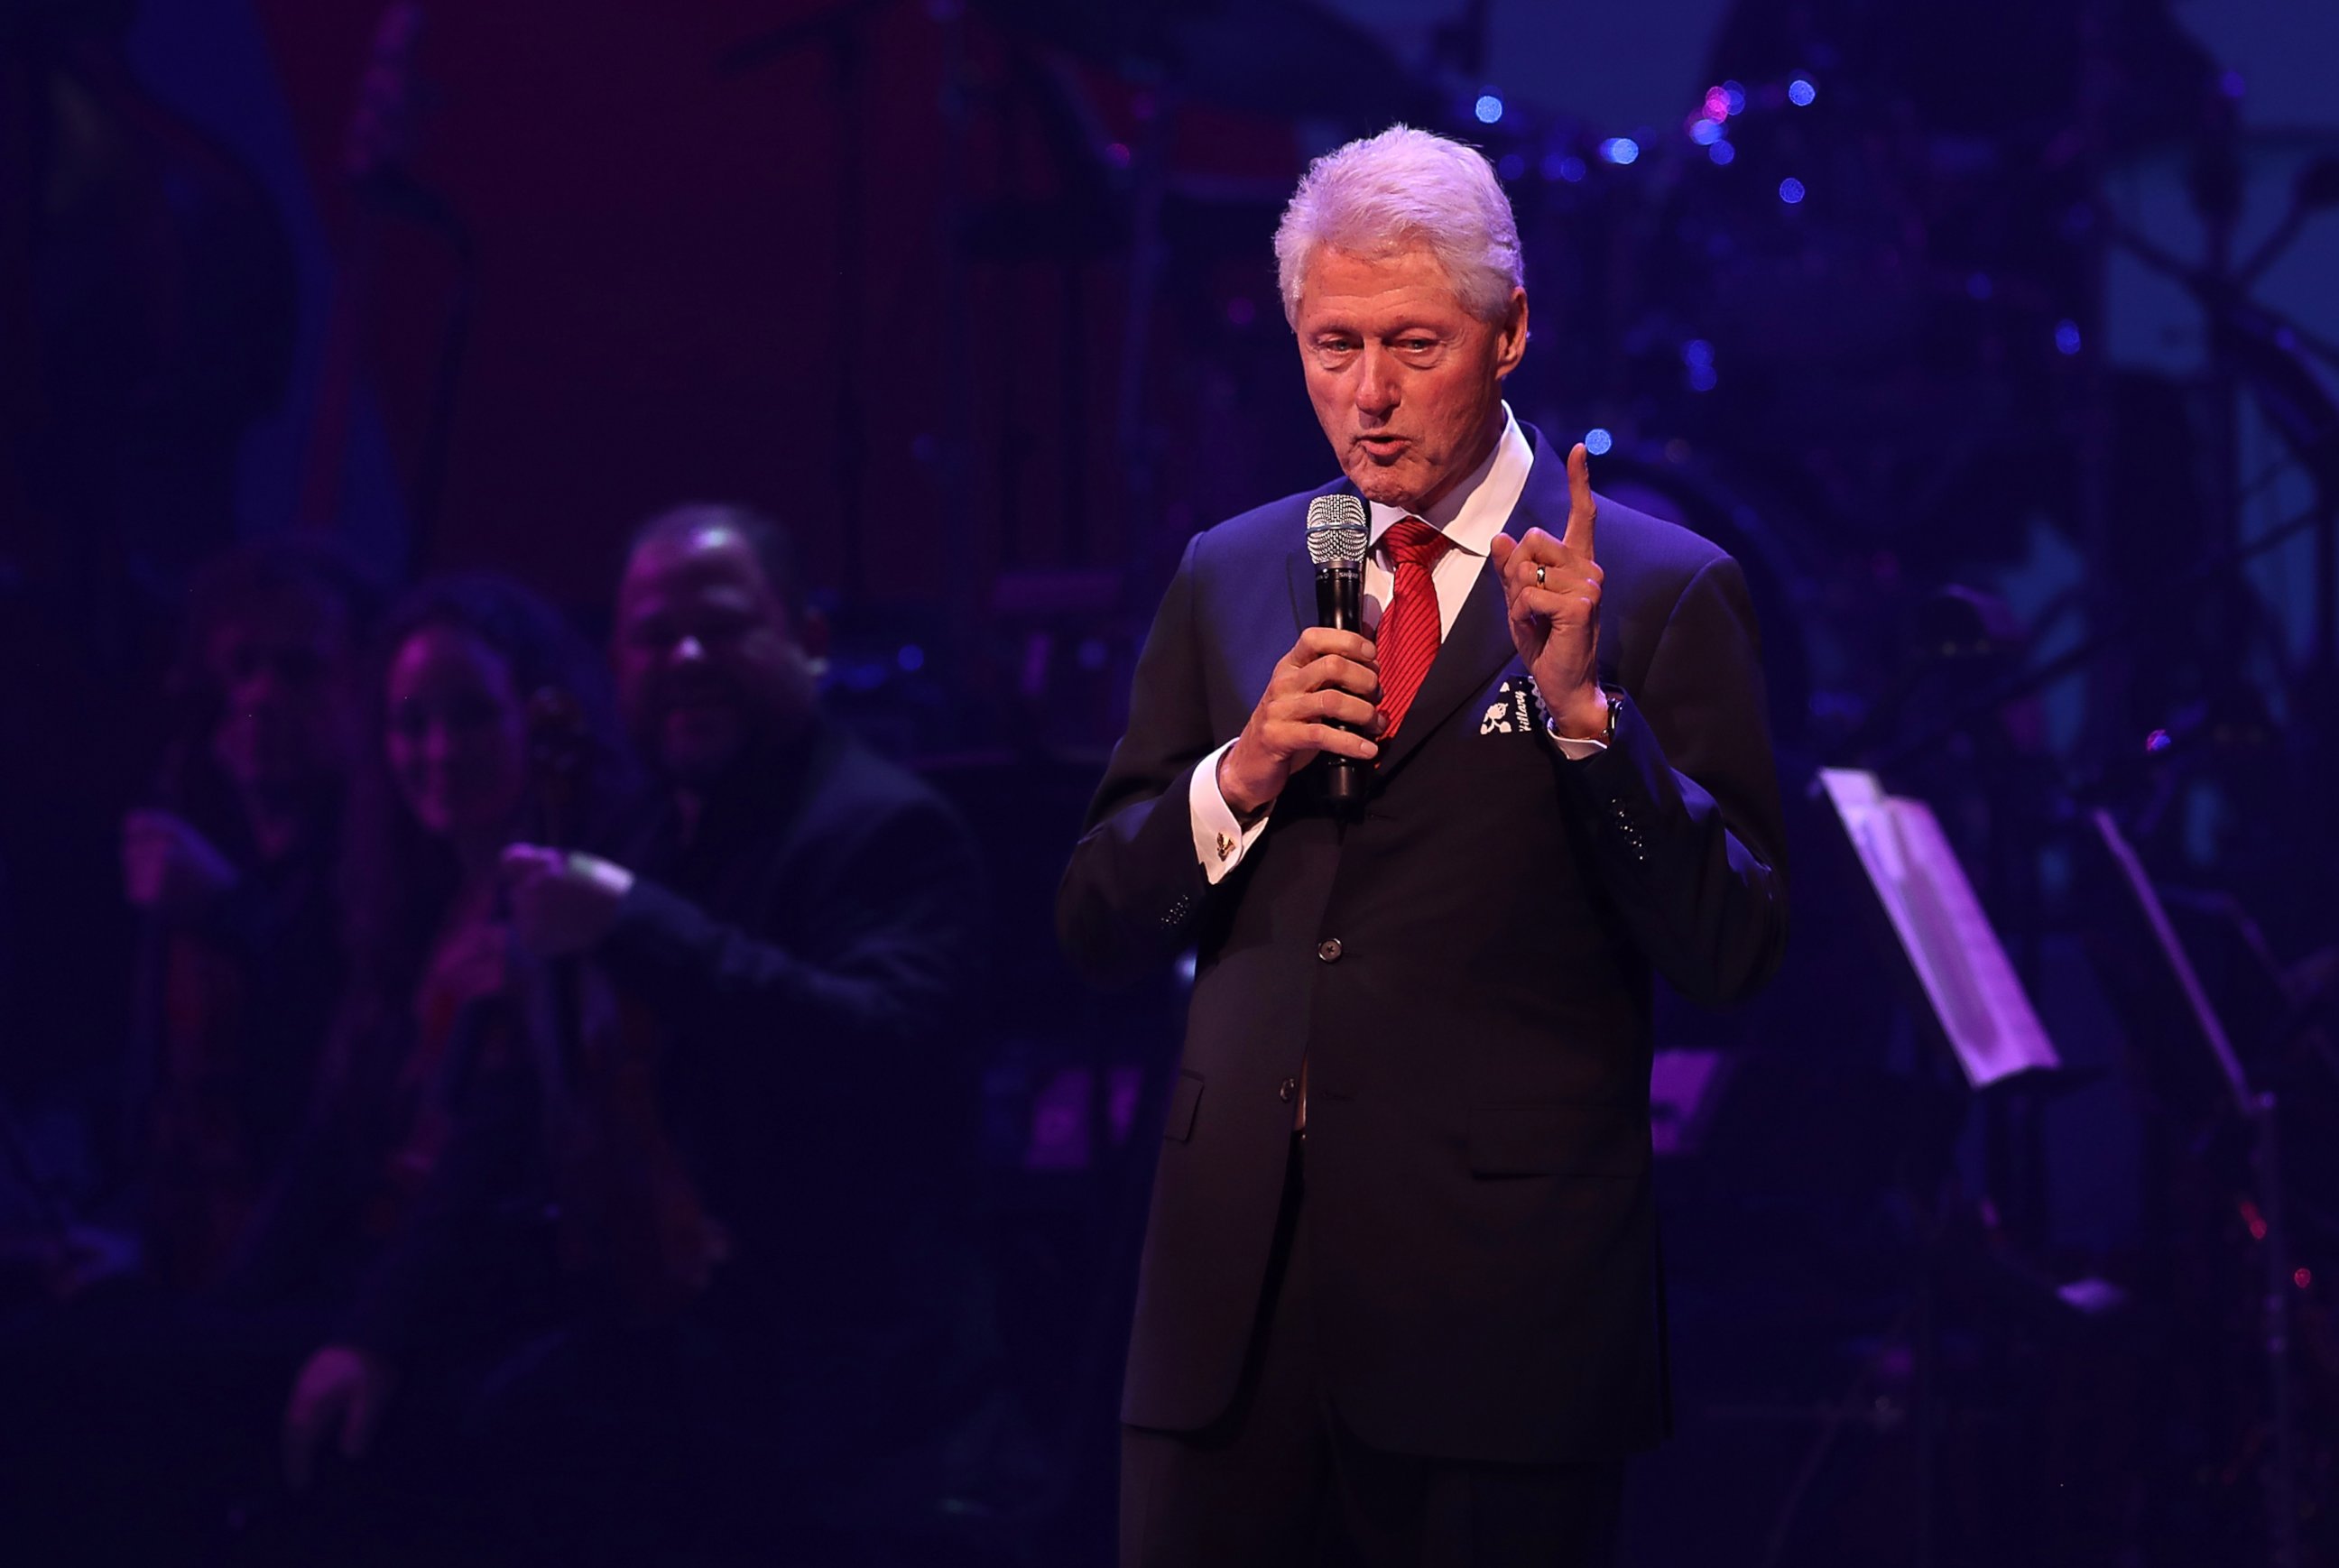 PHOTO: Former U.S. president Bill Clinton speaks during the Hillary Victory Fund - Stronger Together concert at St. James Theatre on October 17, 2016 in New York City.